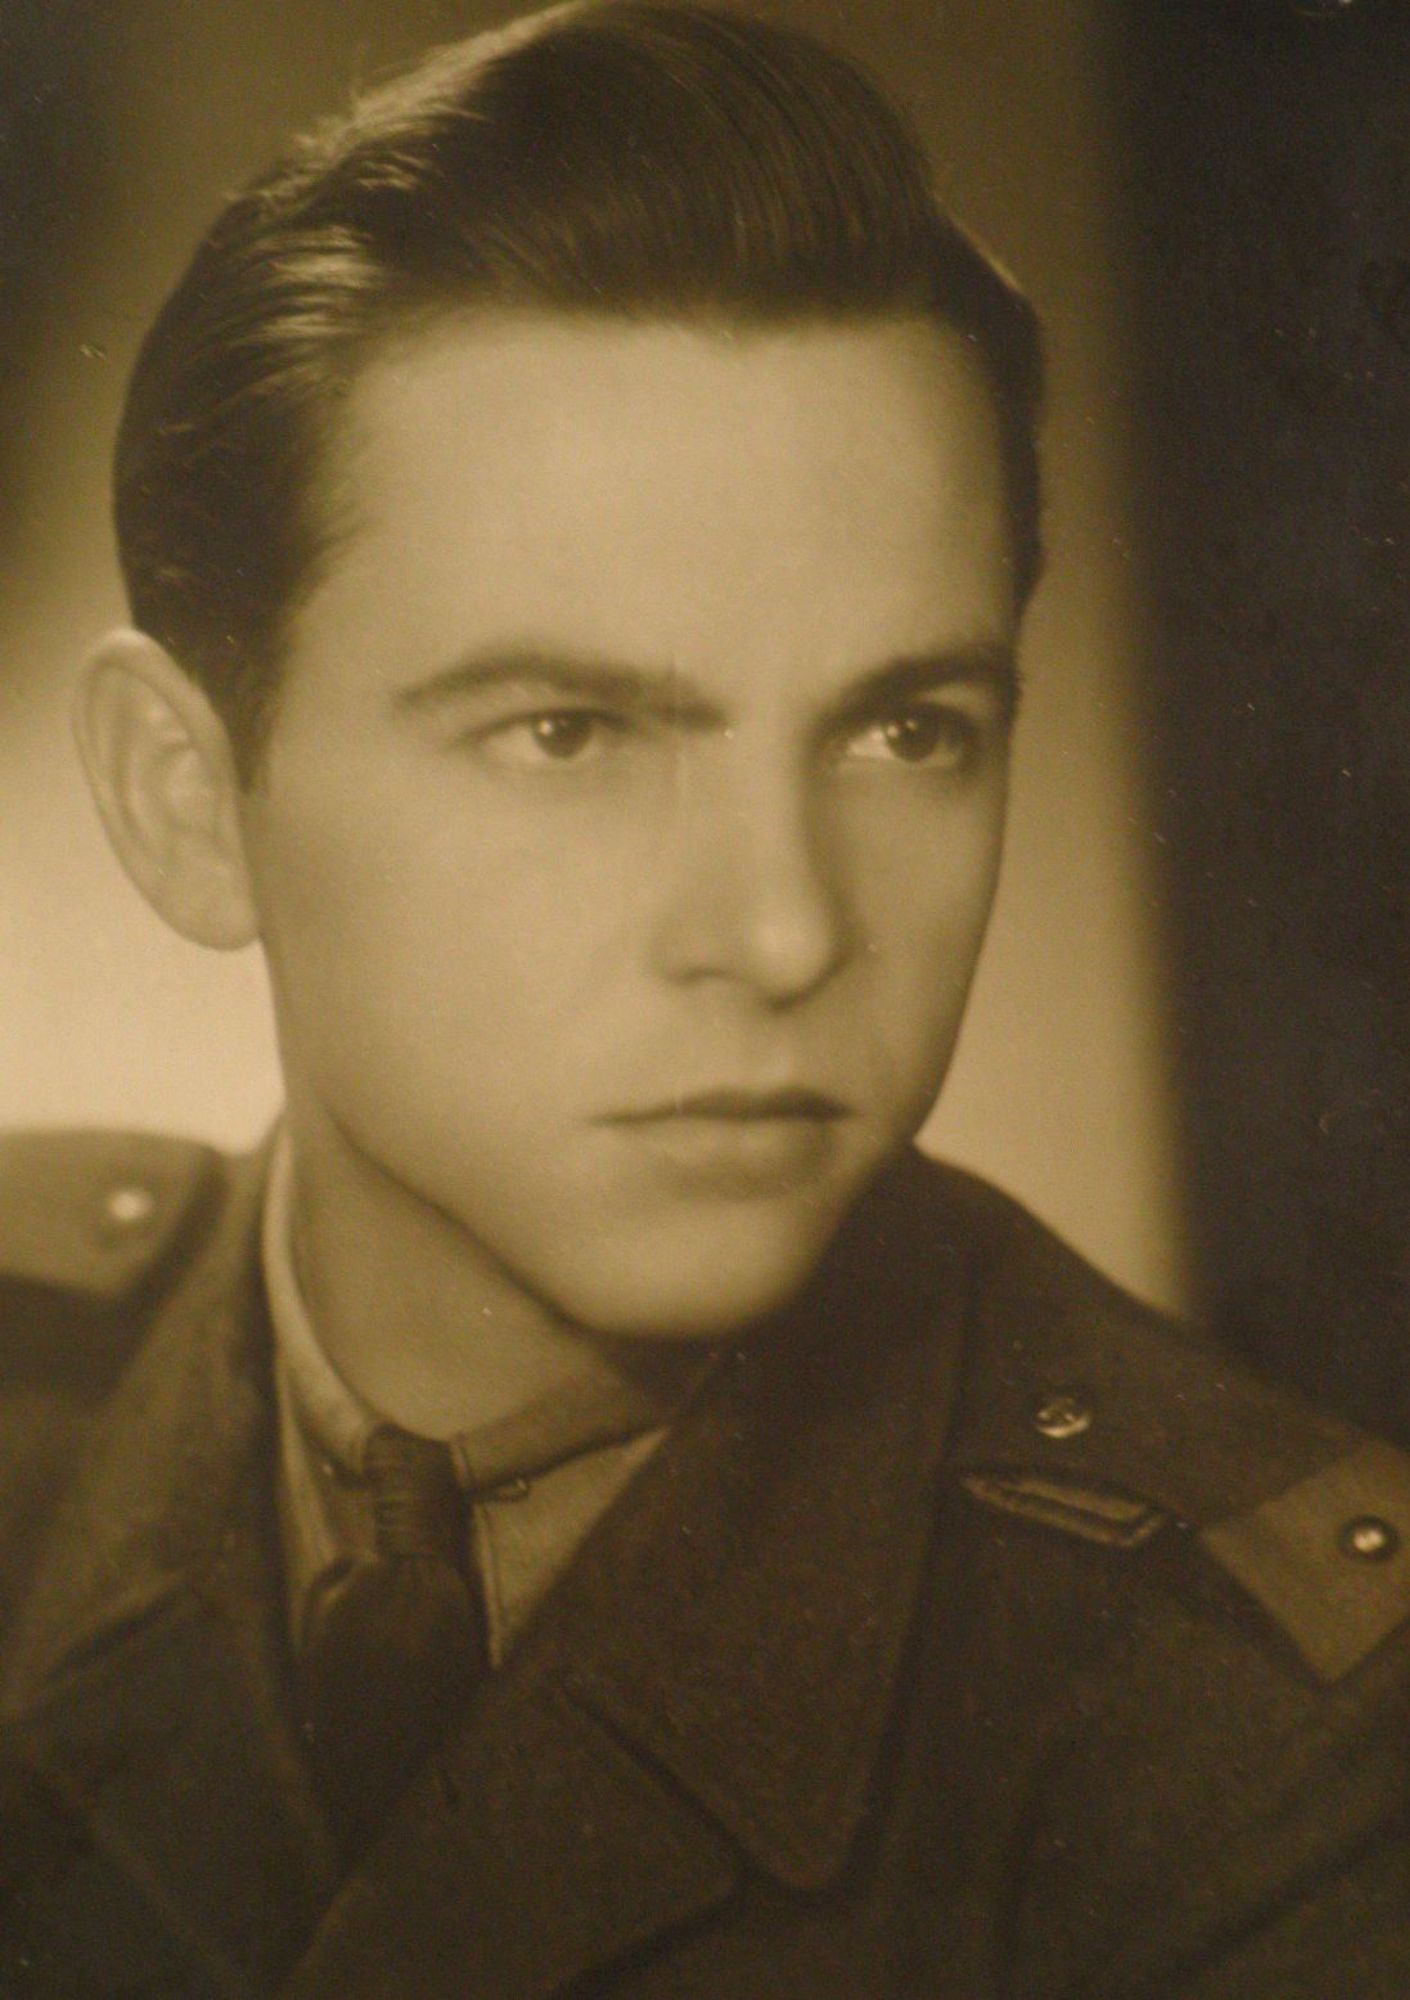 In the army in 1947.